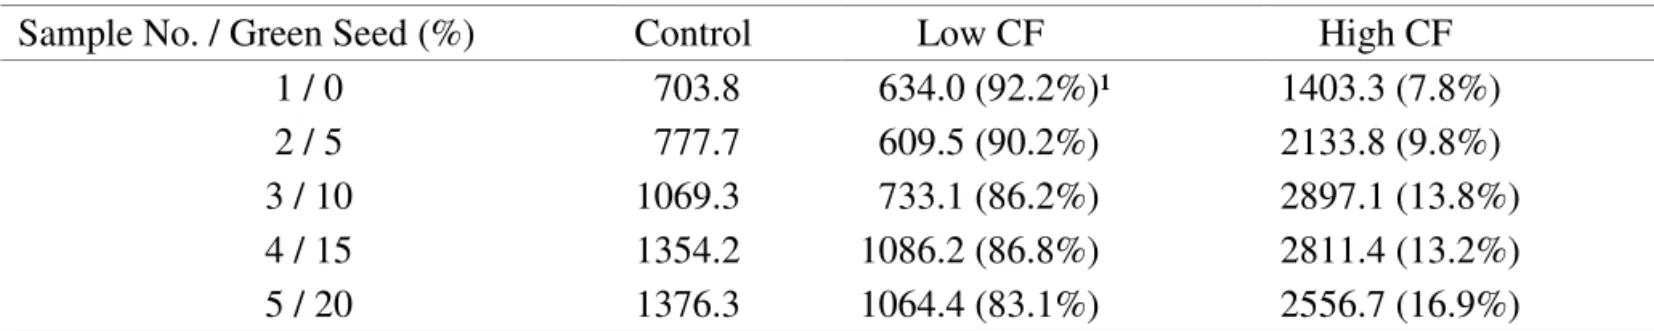 TABLE 1. Average chlorophyll fluorescence (pA) of the control and of the low chlorophyll fluorescence (Low CF) and  high chlorophyll fluorescence (High CF) fractions of soybean seeds of the TMG 113 RR cultivar, after  sorting the seeds with the JS 2001 See